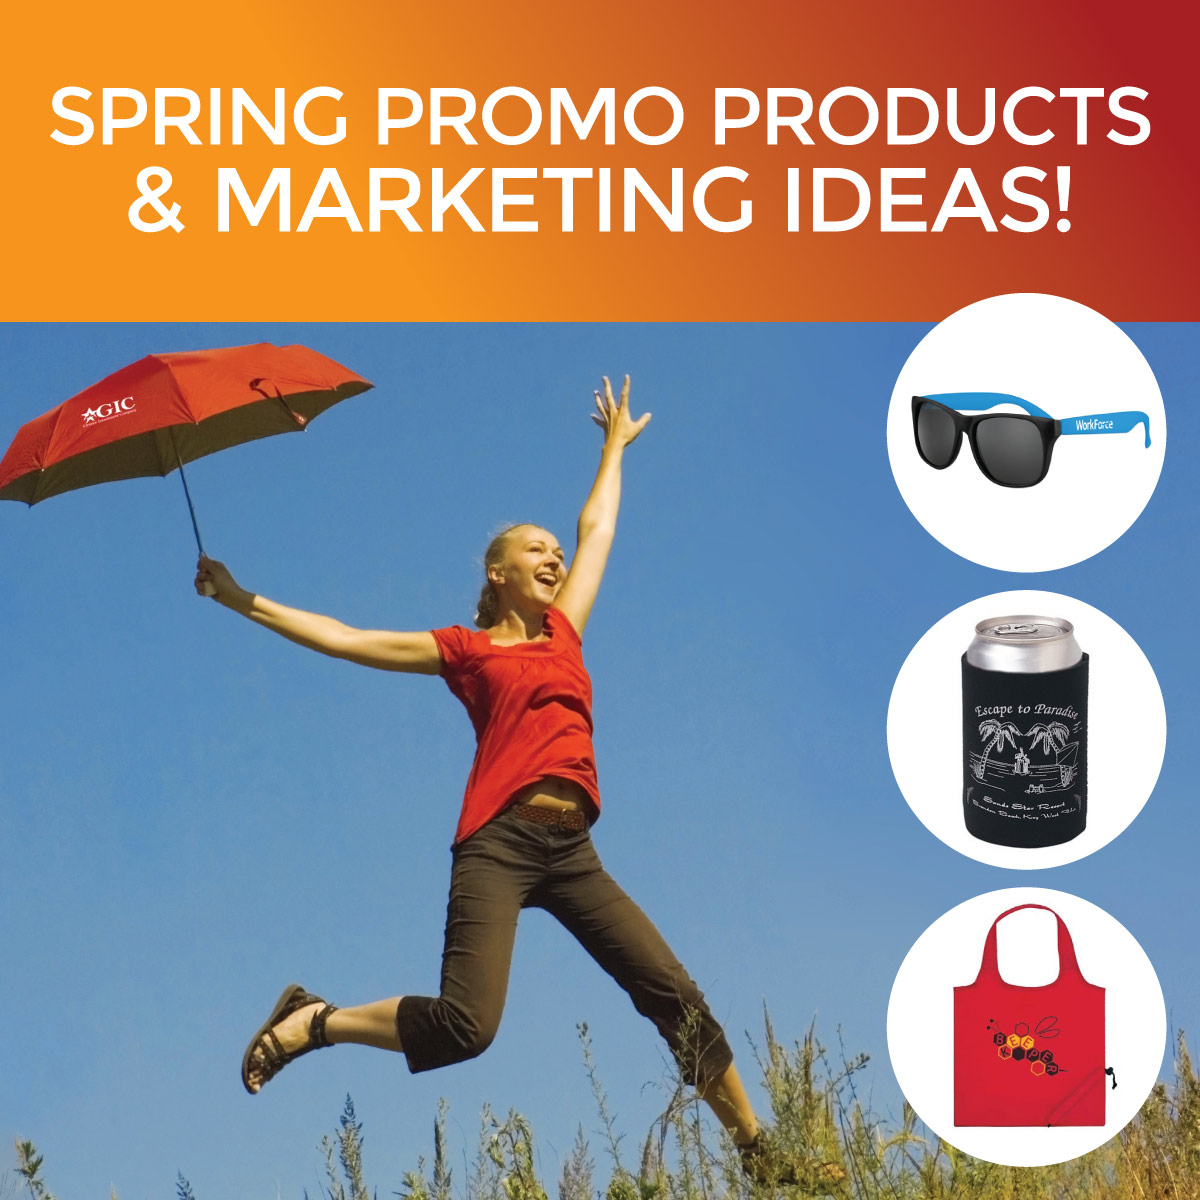 Marketing swag & promotional products + ideas, tips, & inspiration!